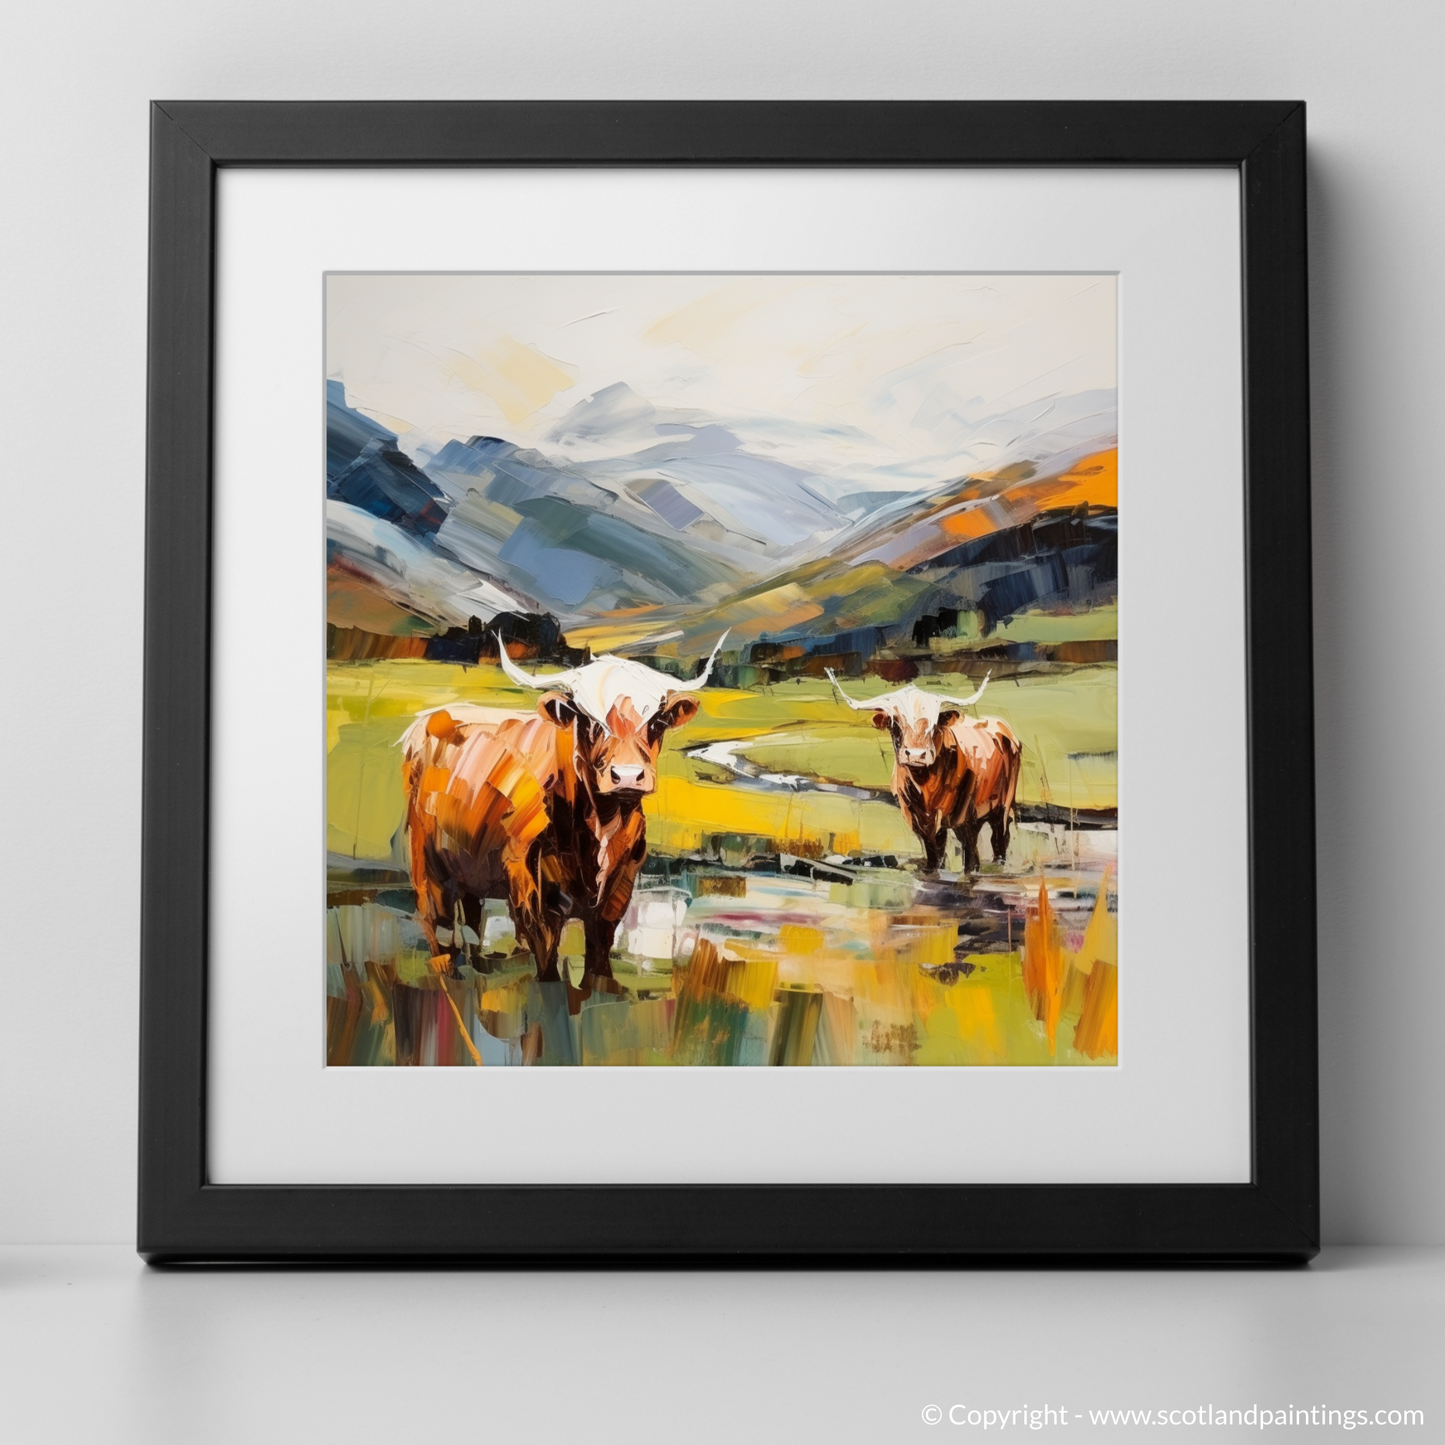 Art Print of Highland cows in Glencoe with a black frame